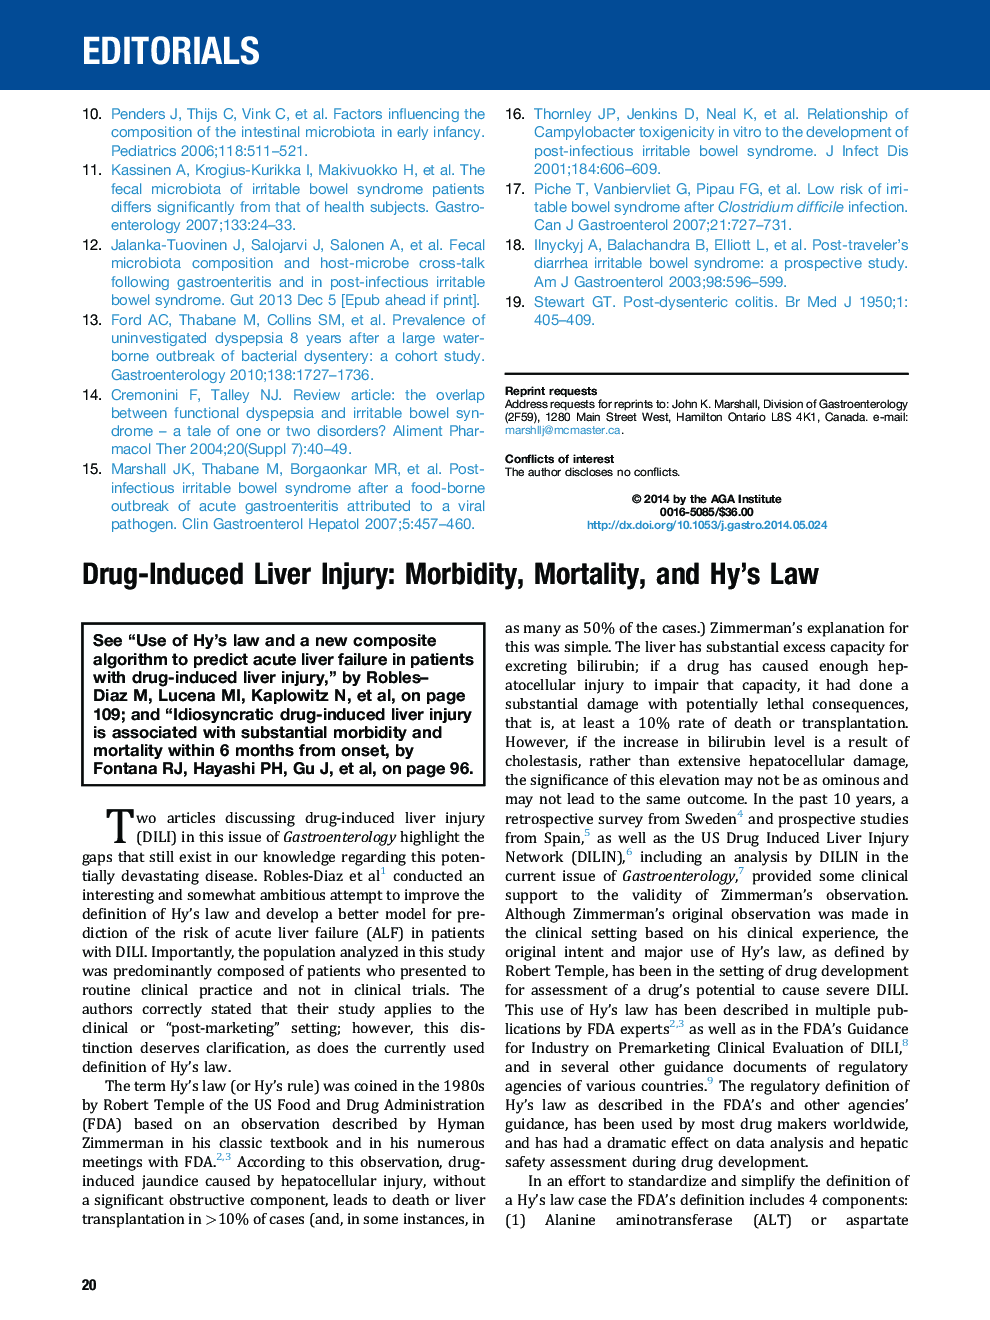 Drug-Induced Liver Injury: Morbidity, Mortality, and Hy's Law